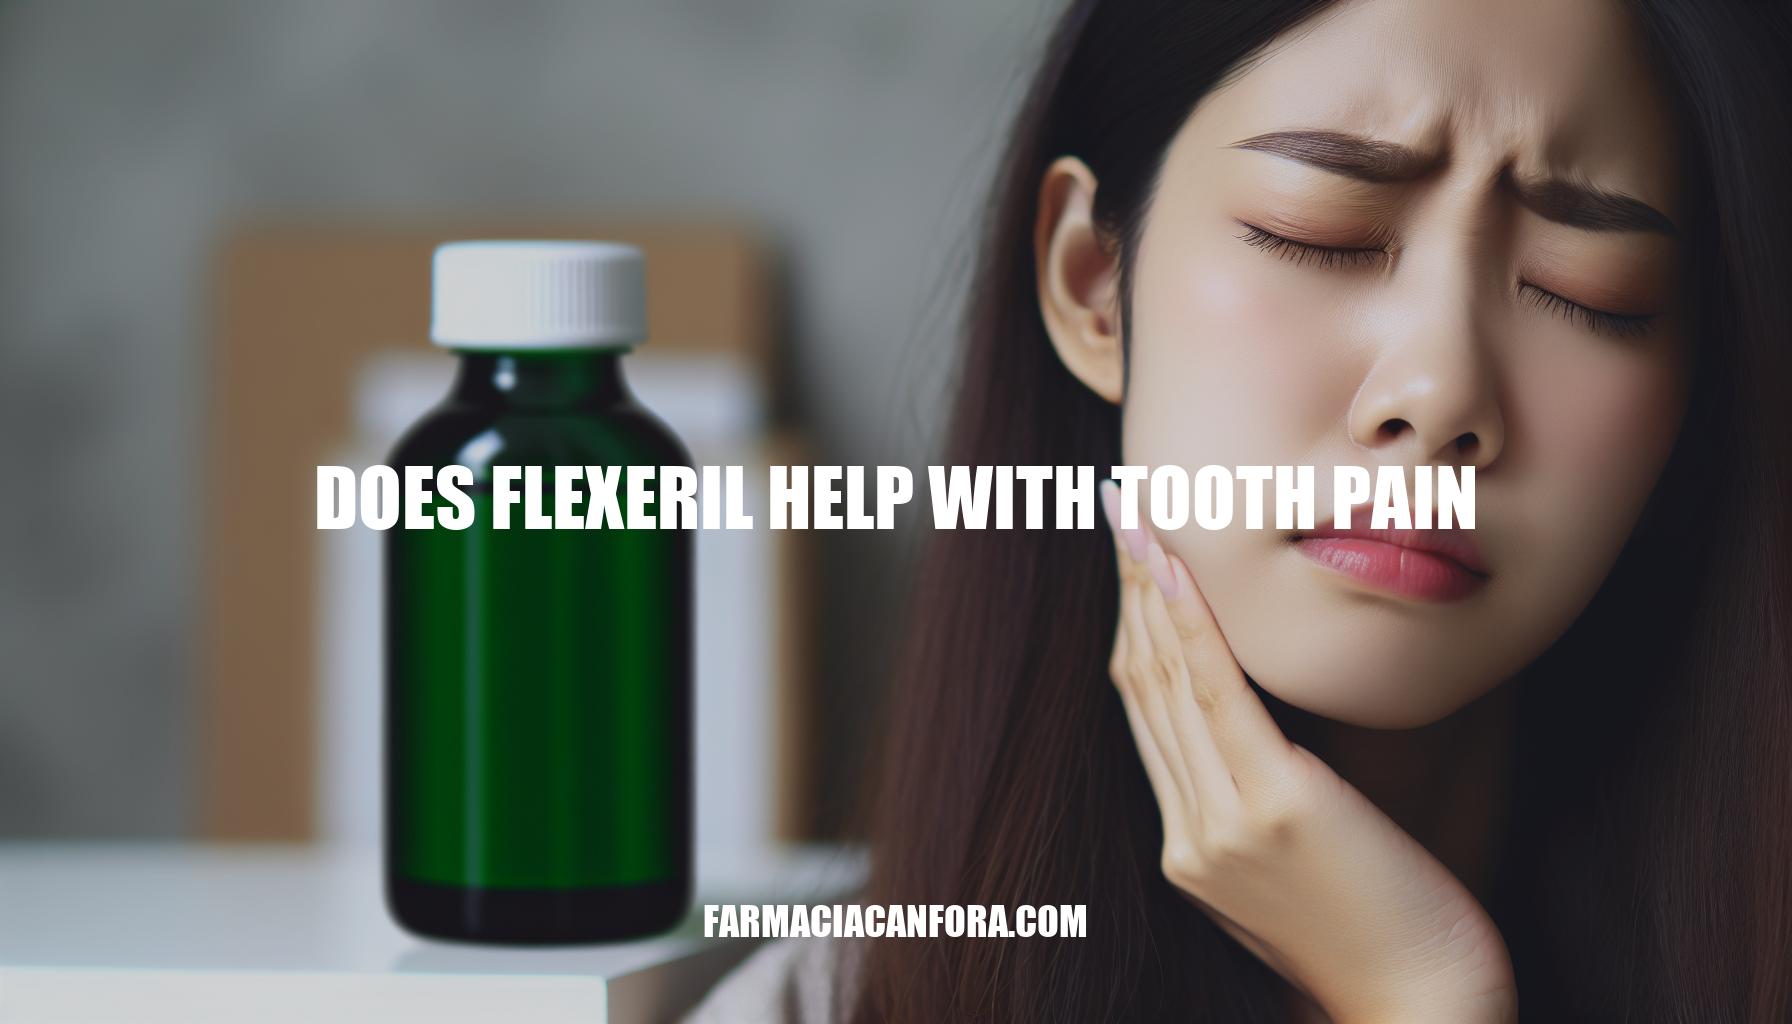 Can Flexeril Help with Tooth Pain? Insights and Considerations